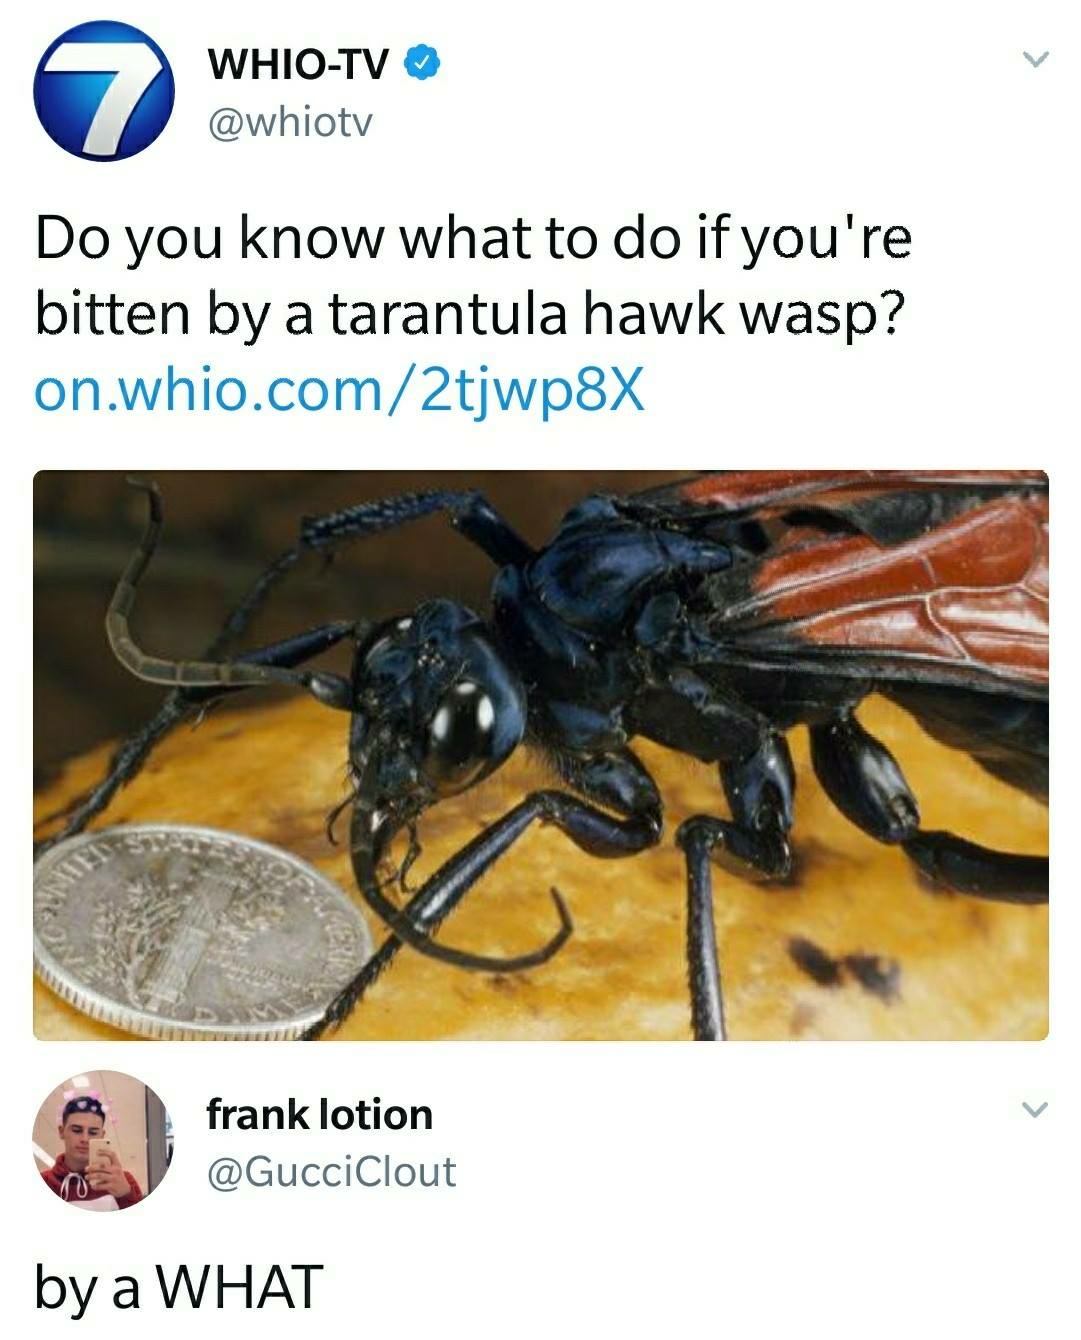 do you know what to do if you re bitten by a tarantula hawk wasp - WhioTv Do you know what to do if you're bitten by a tarantula hawk wasp? on.whio.com2tjwp8X frank lotion by a What